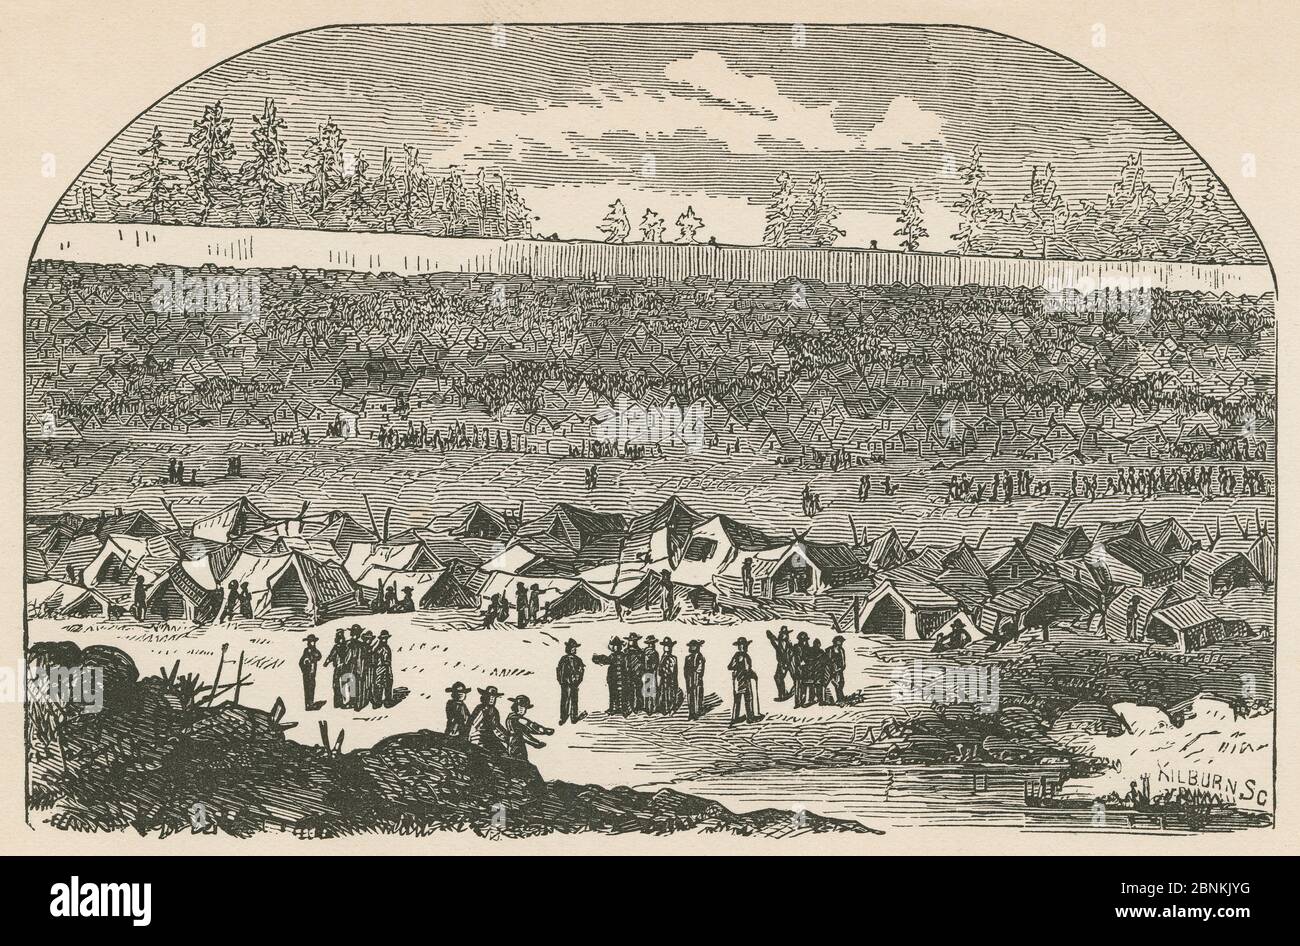 Antique 1866 engraving, “view of the interior of the prison, with quagmire and crowds of huts and men beyond” from The Soldier’s Story by Goss. “The space thus filled in was occupied, almost to the very verge of the sink, by the prisoners, gathered here for the conveniences of the place, and for obtaining water.” Andersonville Prison was a Confederate prisoner of war camp in Andersonville, Georgia, during the American Civil War. SOURCE: ORIGINAL ENGRAVING Stock Photo